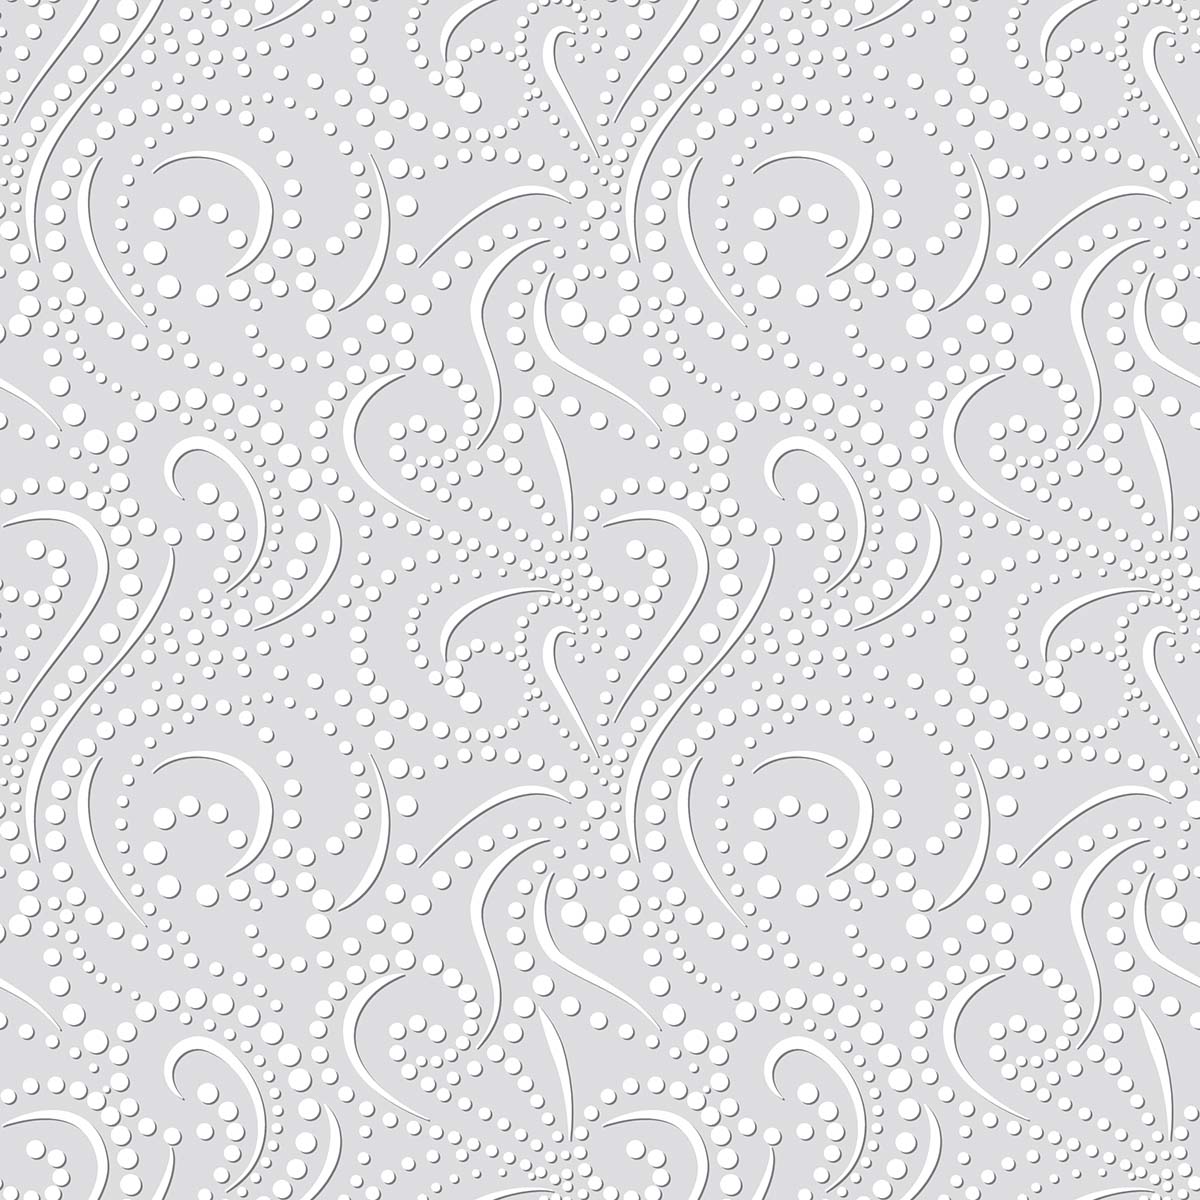 A white pattern with dots and swirls